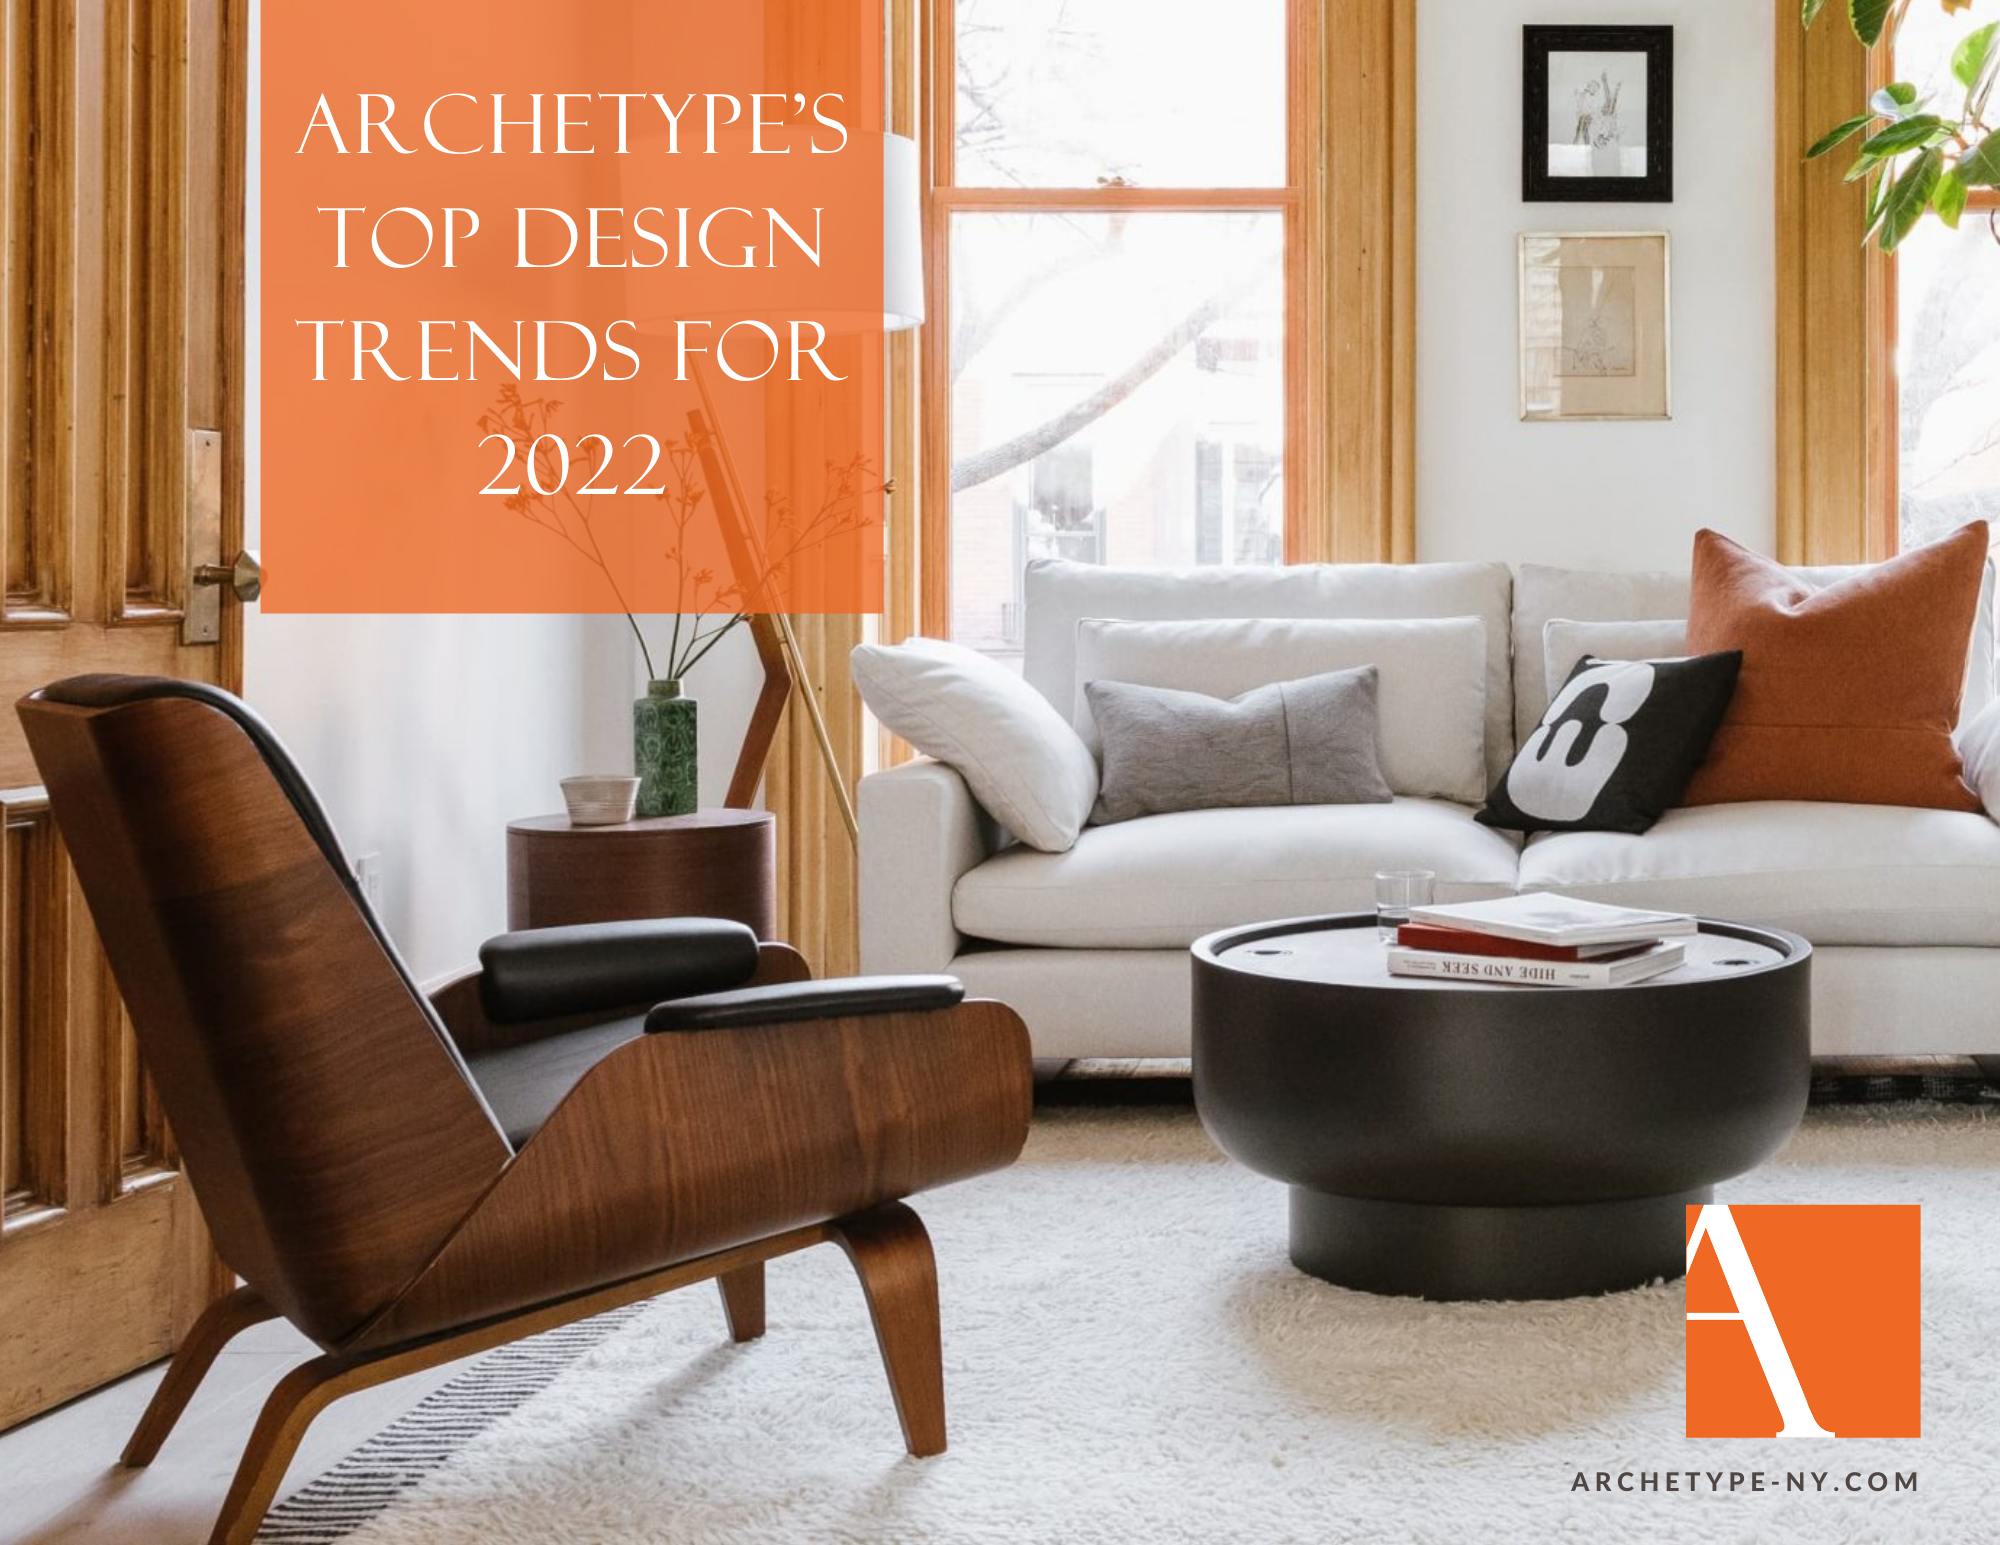 Download now: Archetype's Top Design Trends for 2022